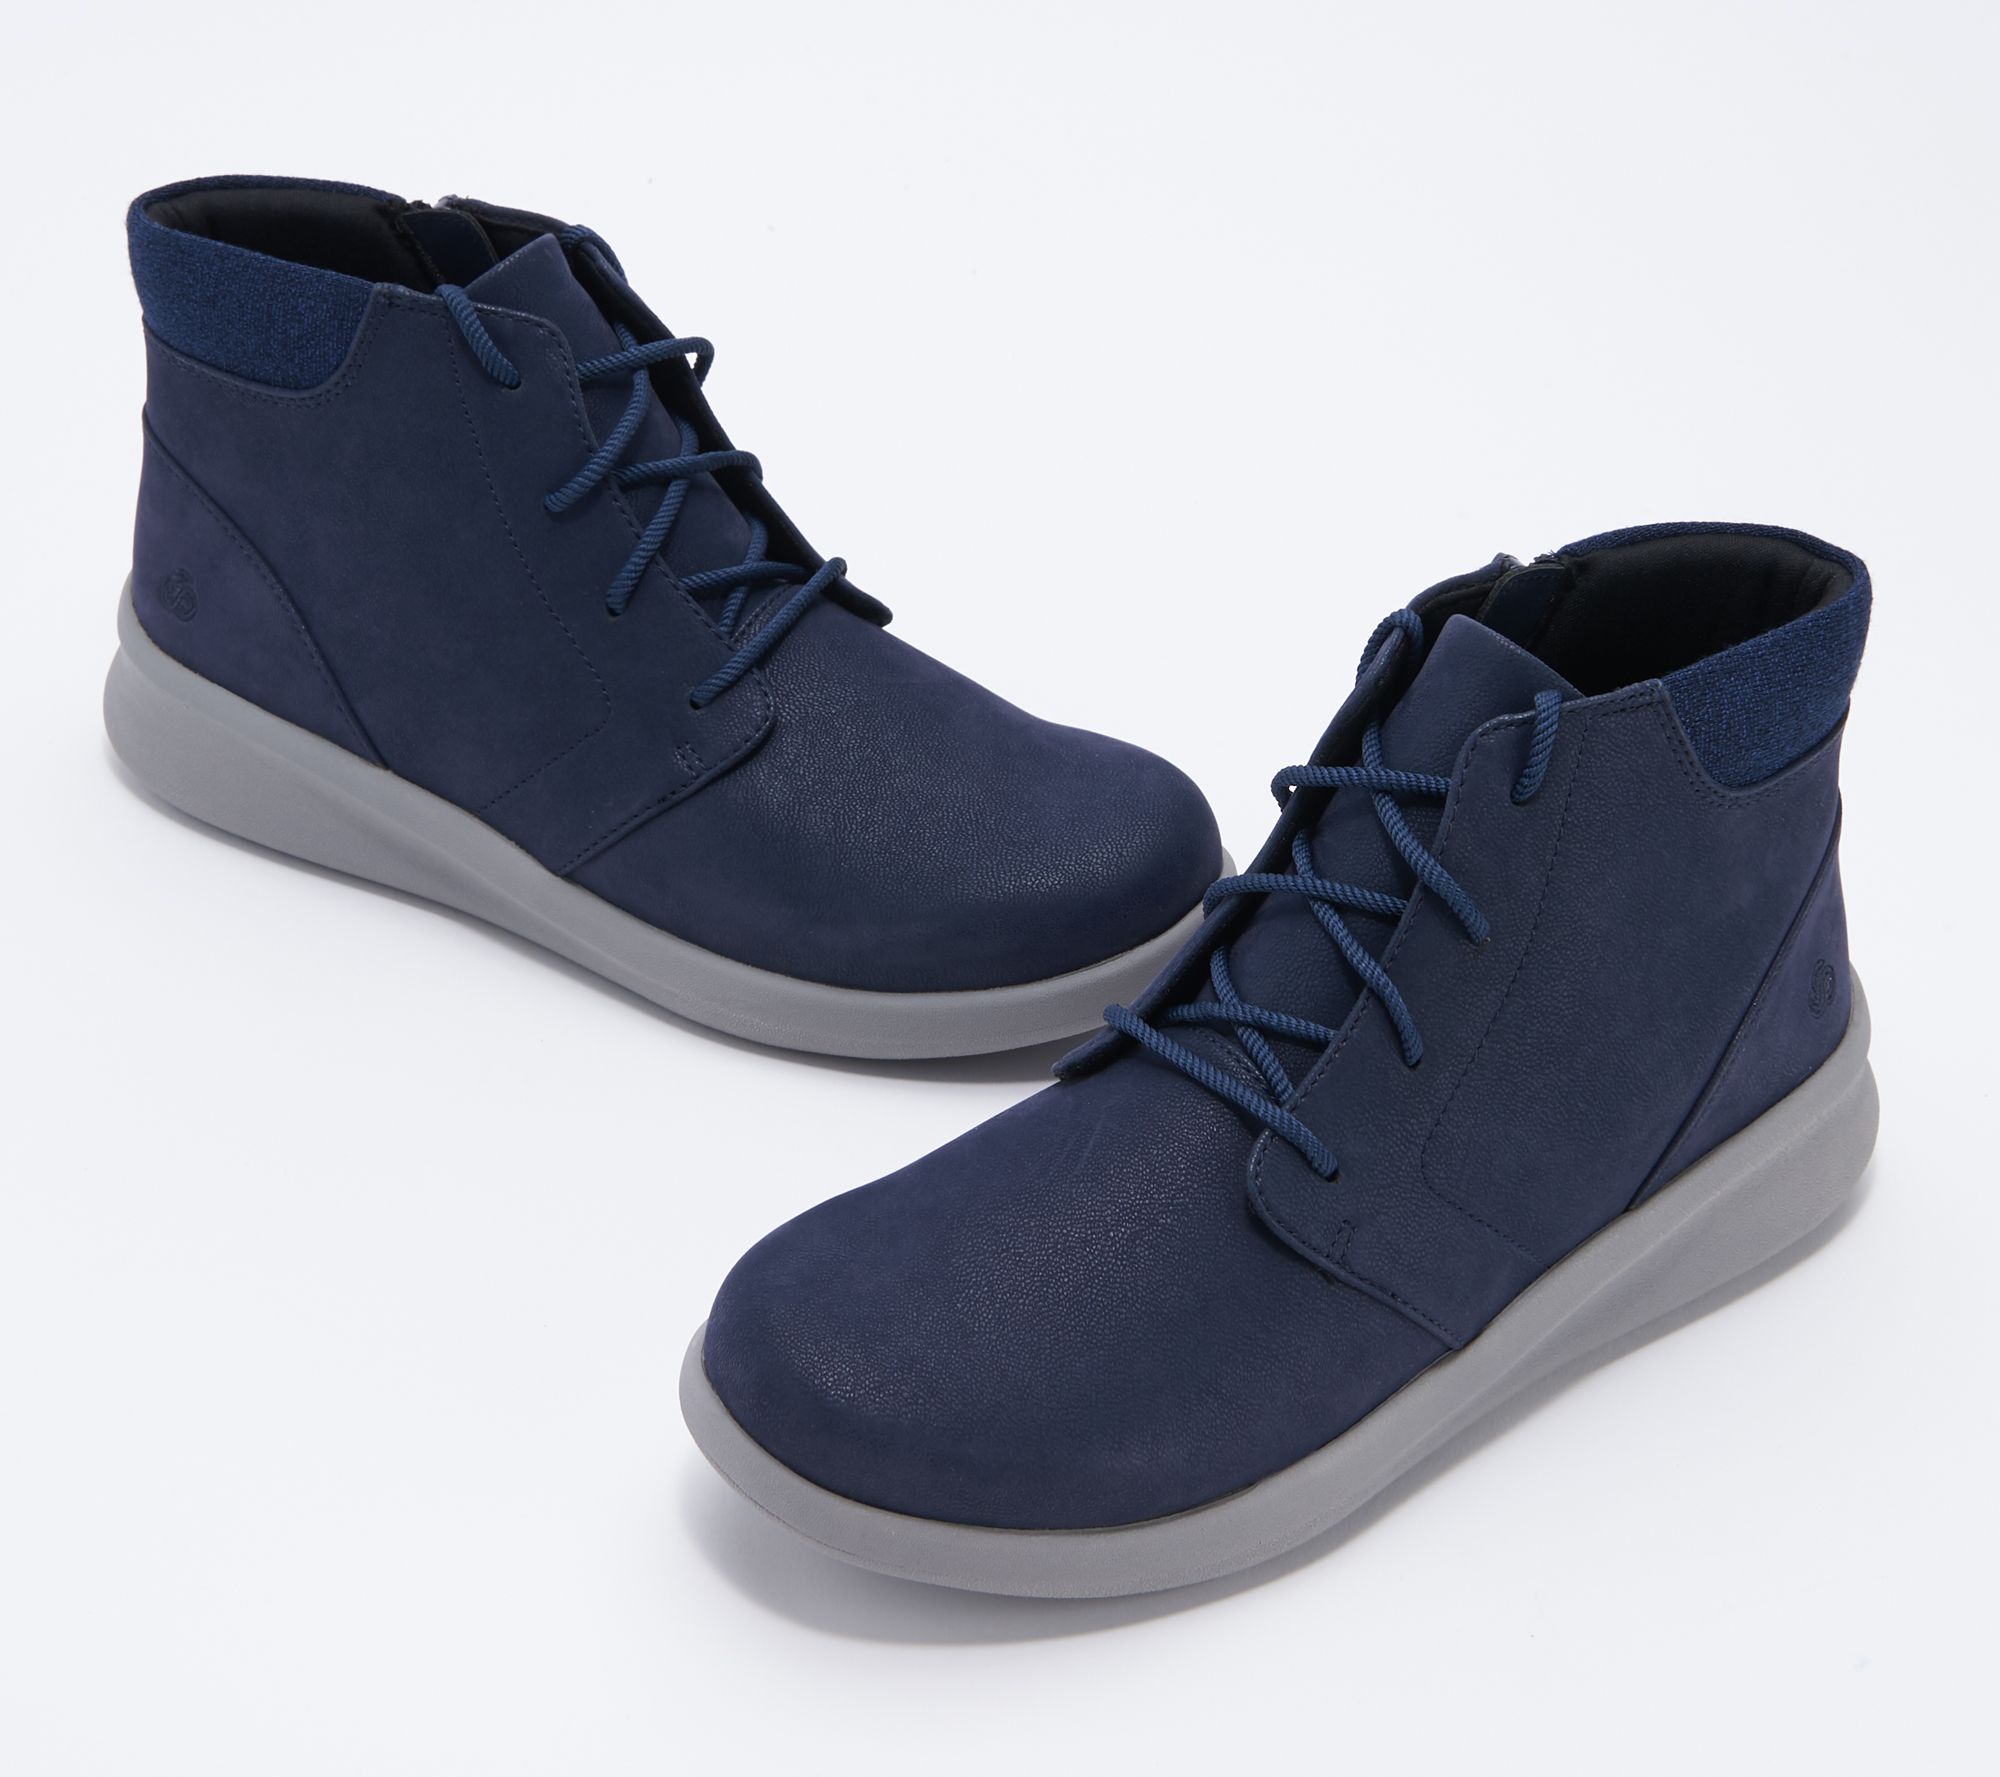 cloudsteppers by clarks ankle boots